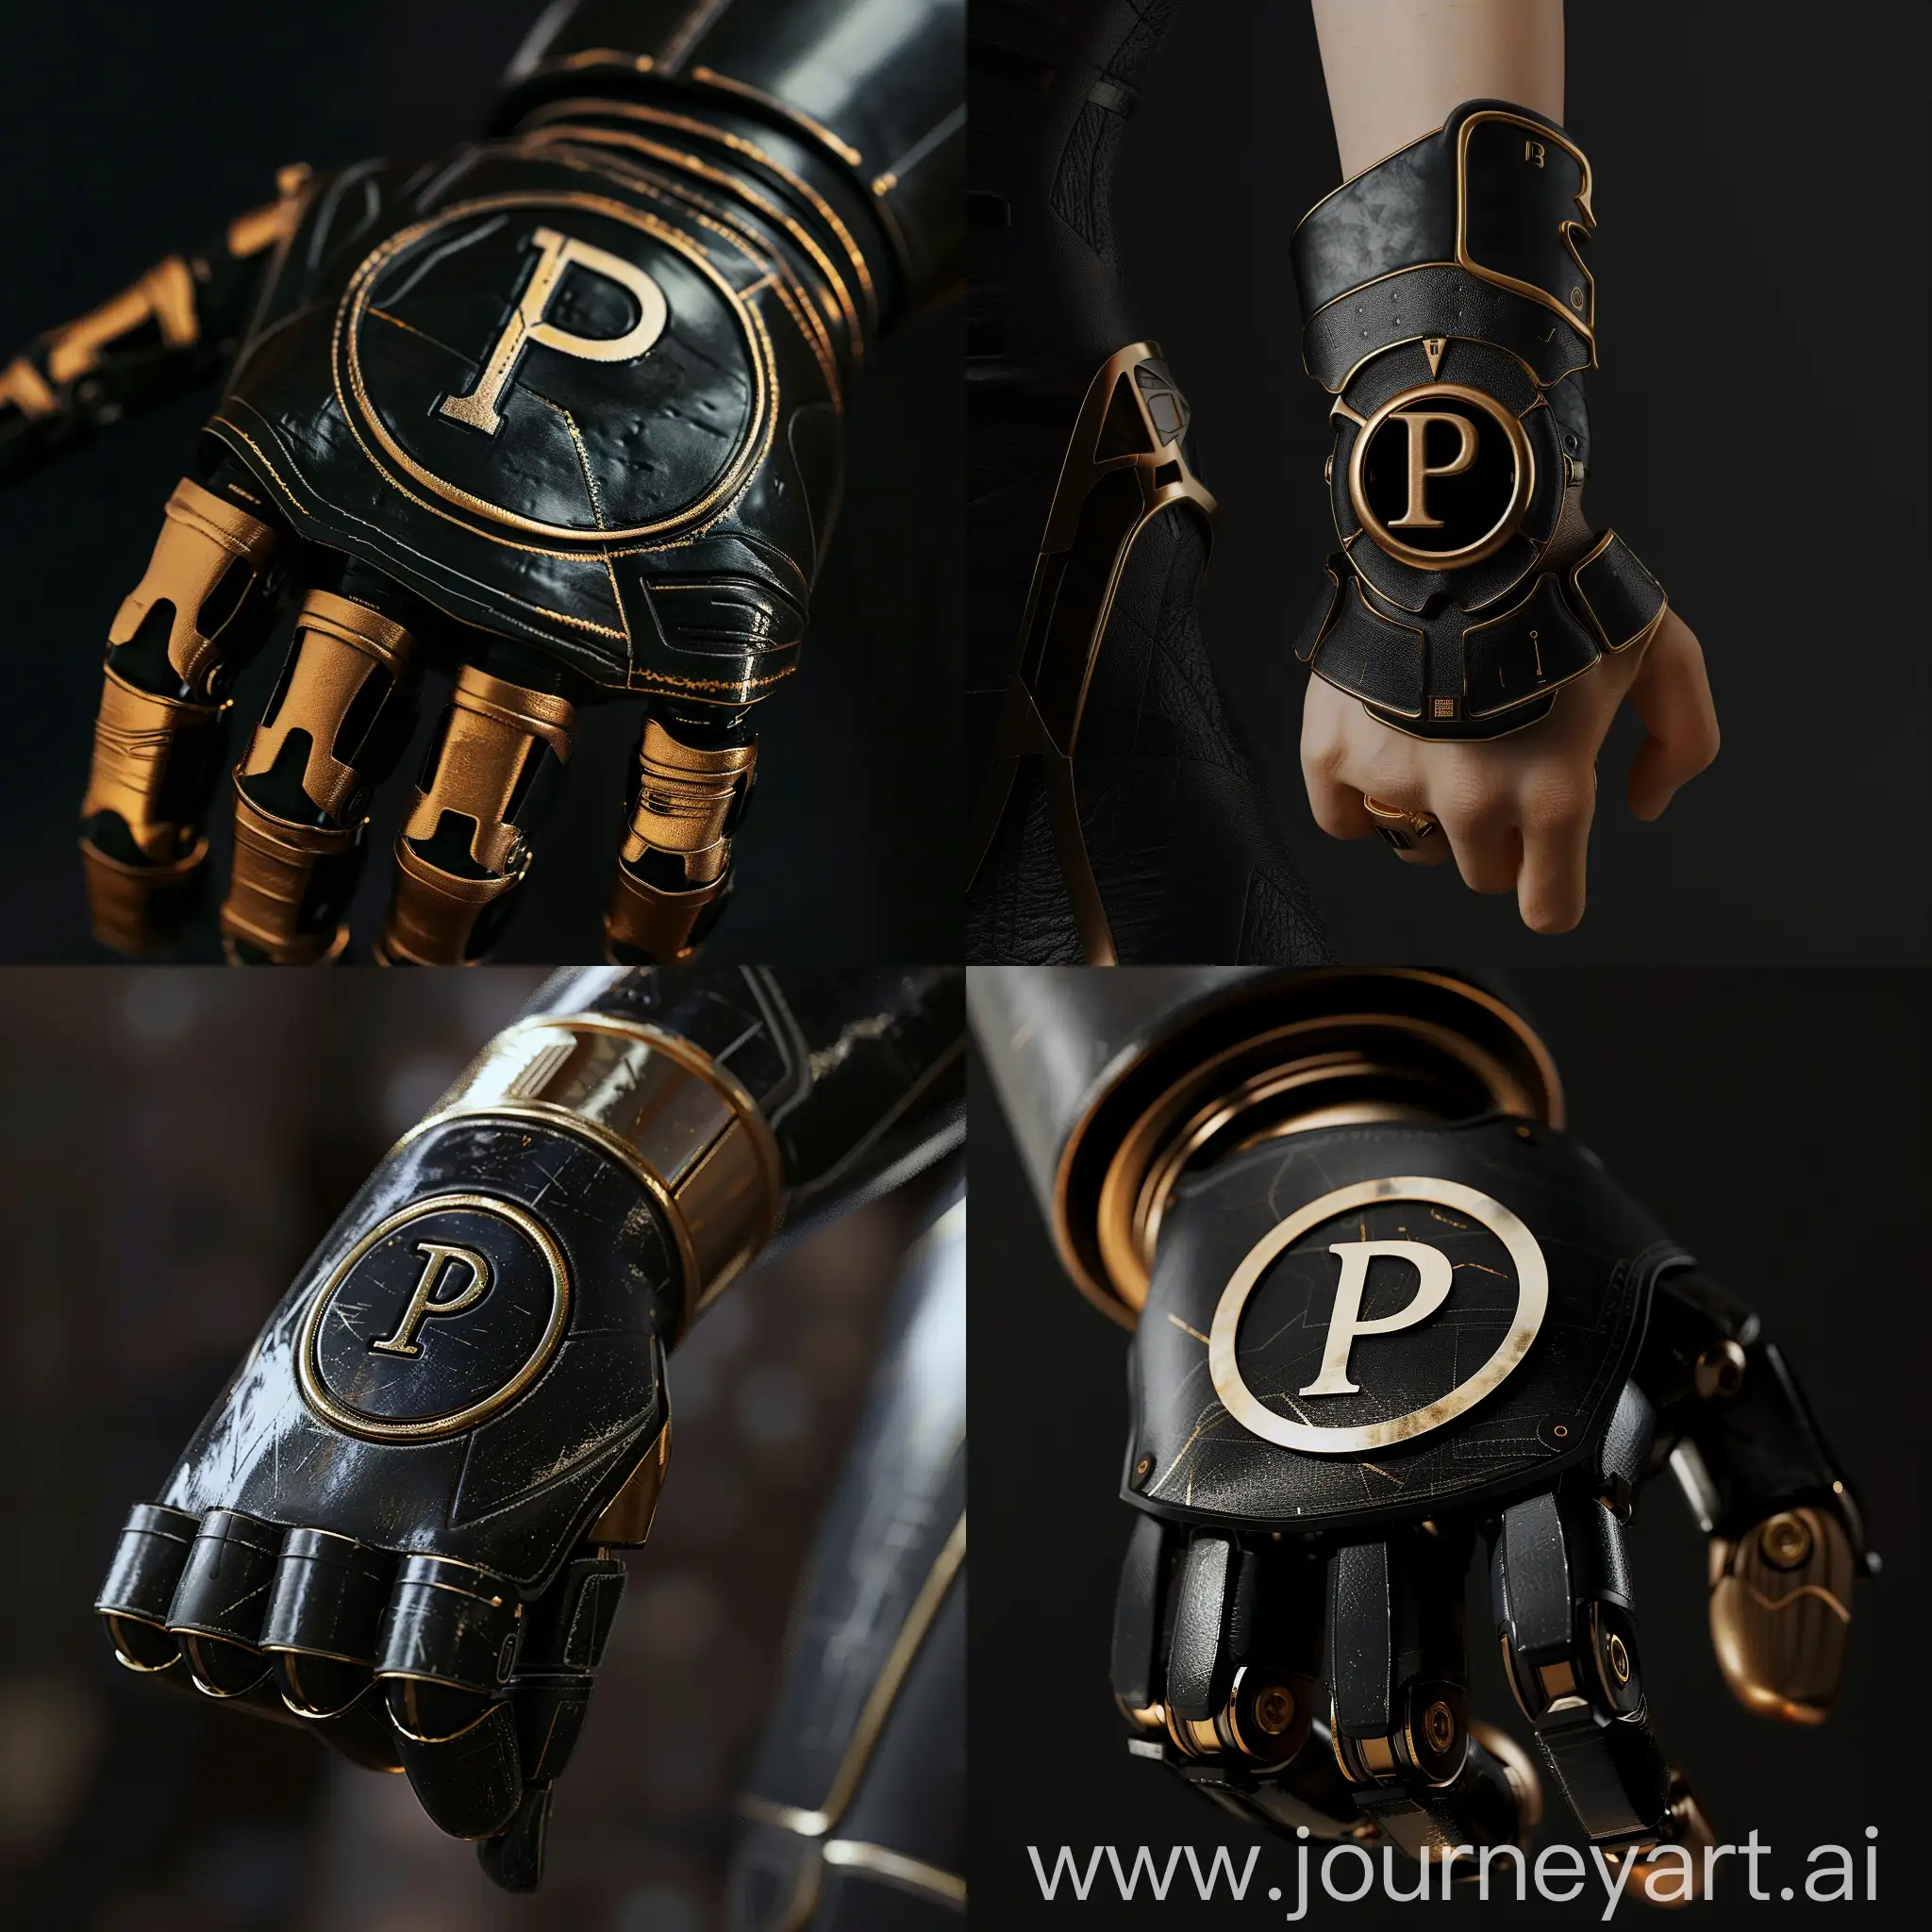 Futuristic-Prosthetic-The-Letter-P-in-a-Circle-with-BlackGold-Shades